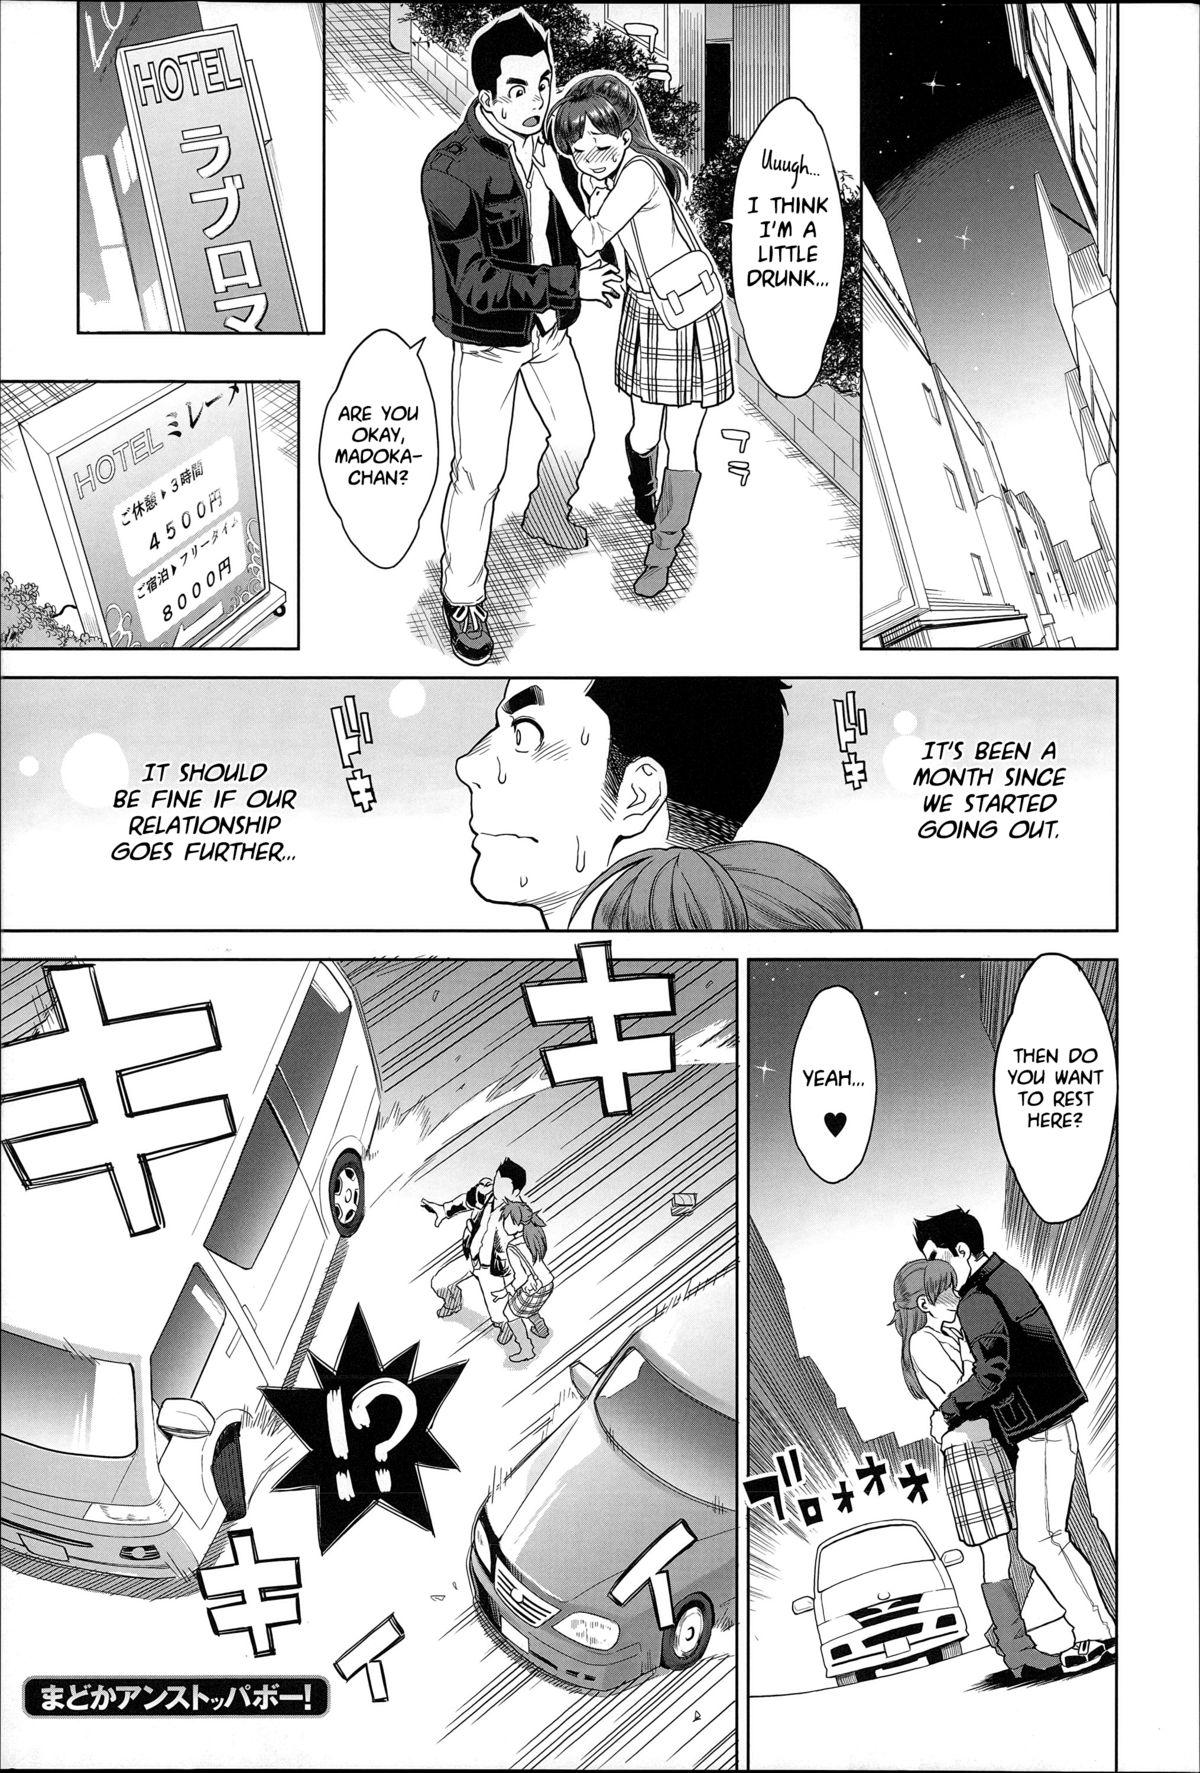 Face Madoka Unstoppable! Ex Girlfriends - Page 1